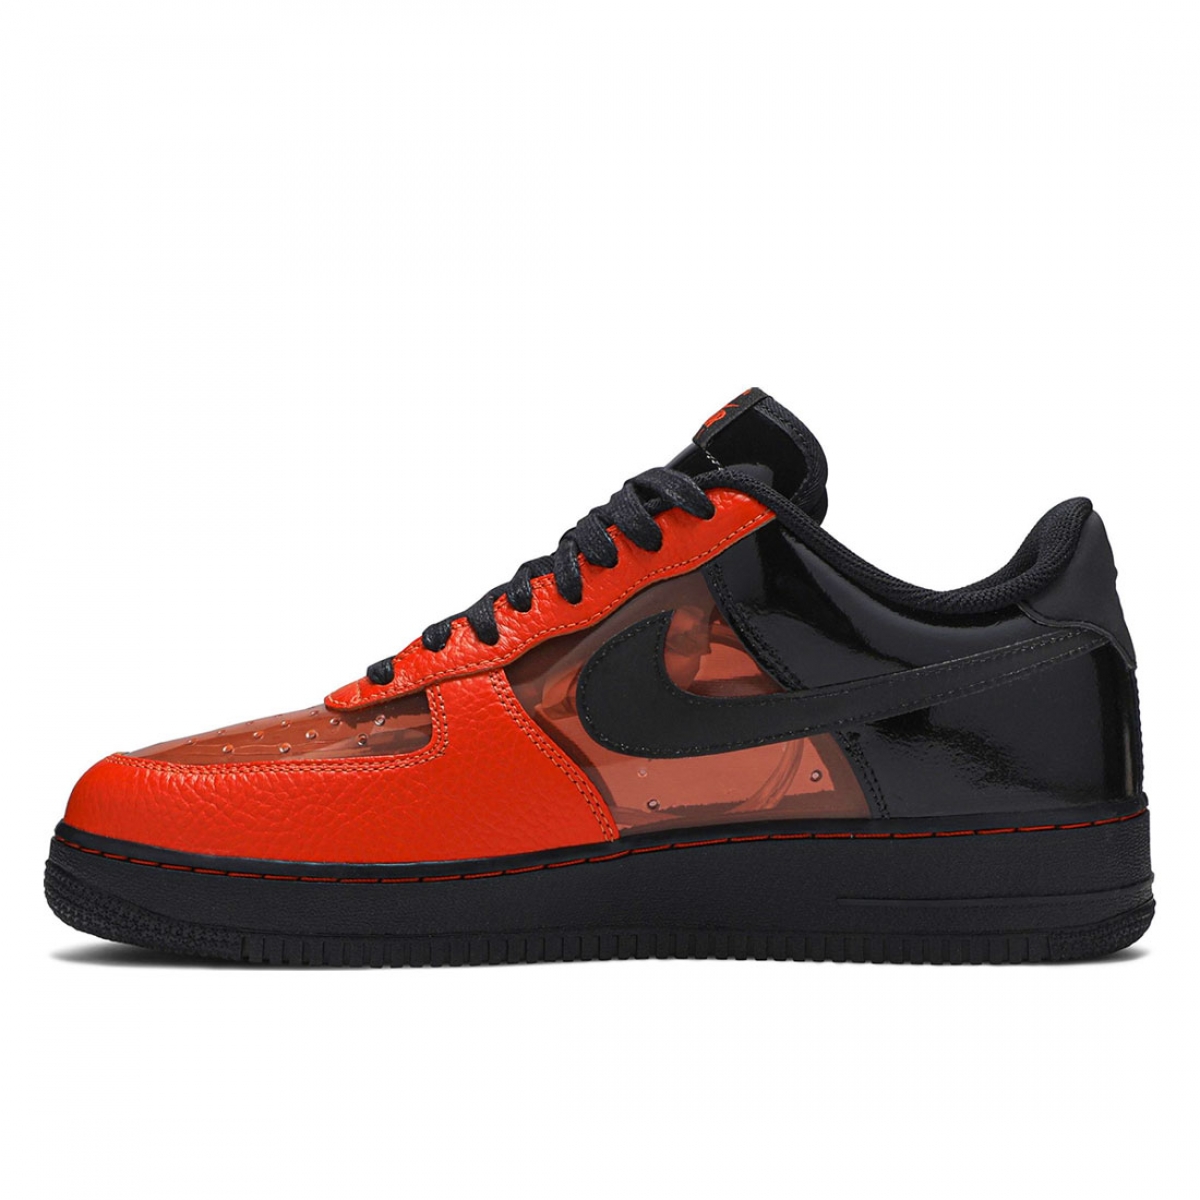 Rotten Thought comfort Air Force 1 Low Shibuya Halloween – PK-Shoes